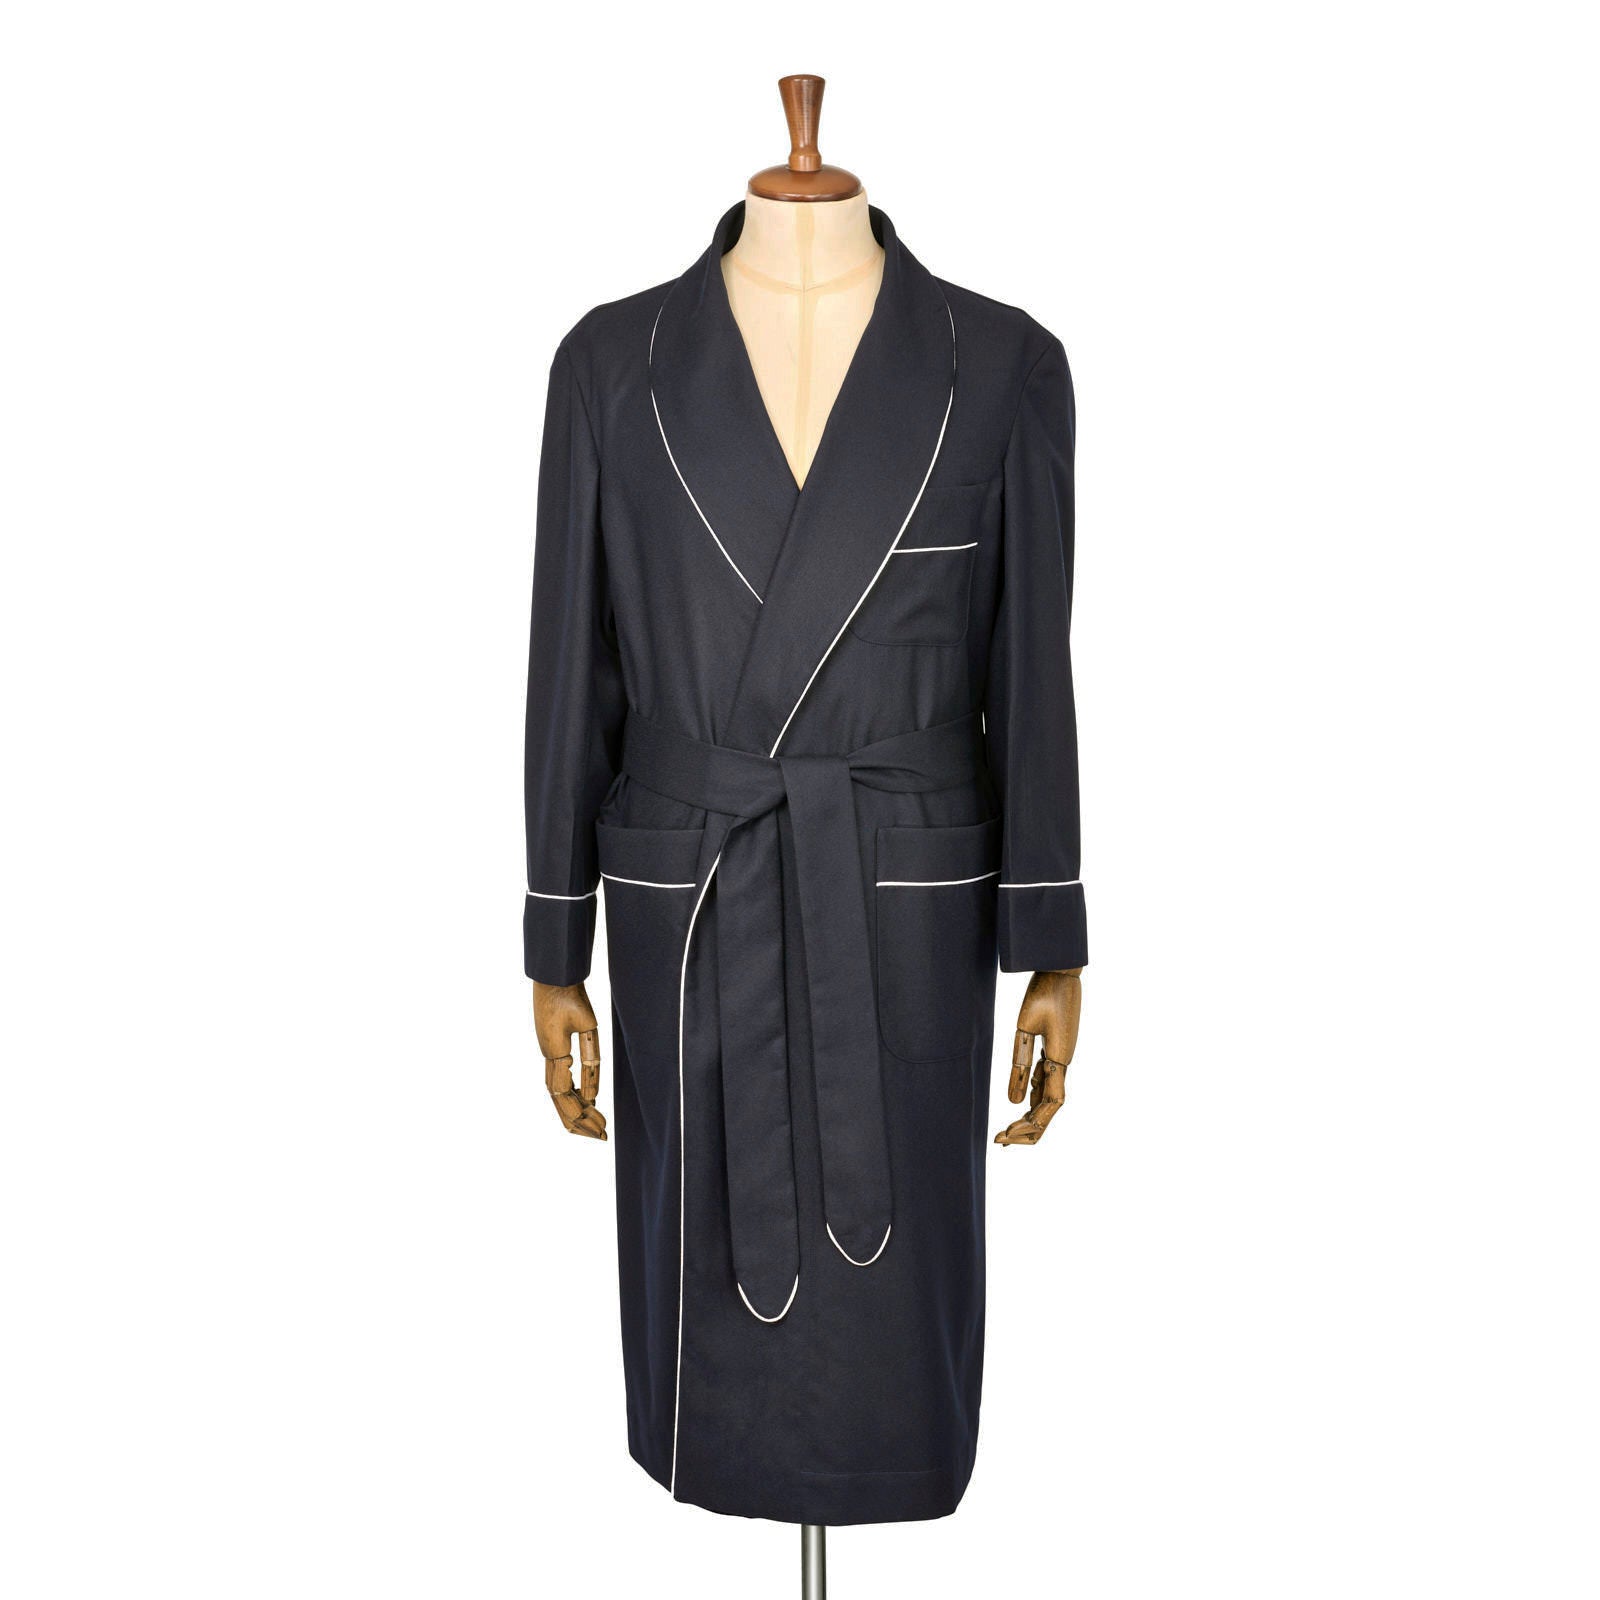 Fox Flannel Lounge Gown in Midnight Plain with White Piping